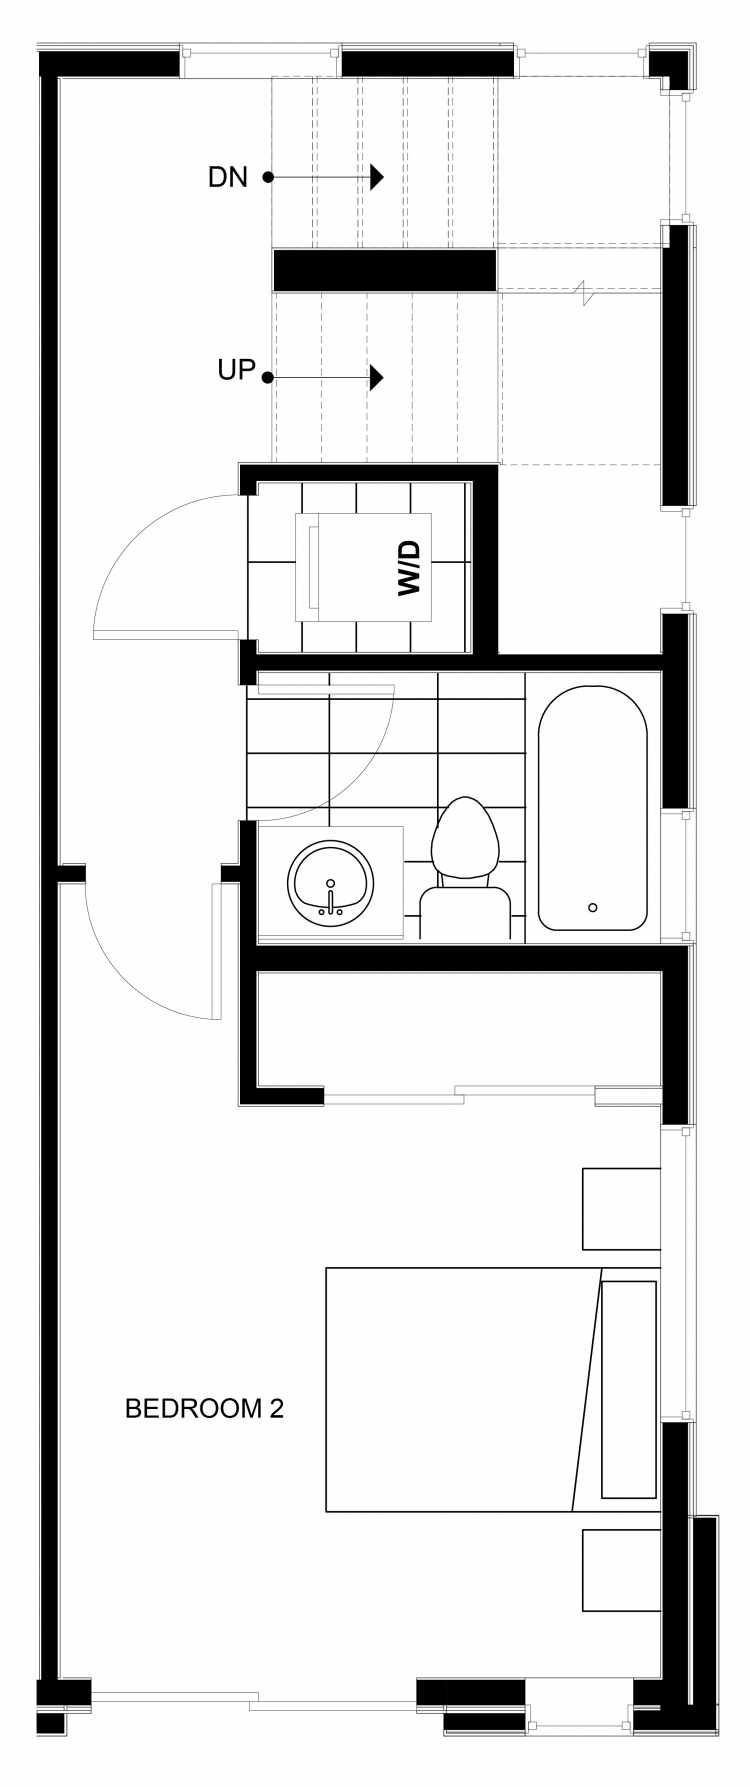 Third Floor Plan of 1538 15th Ave E, One of the Grandview Townhomes in Capitol Hill